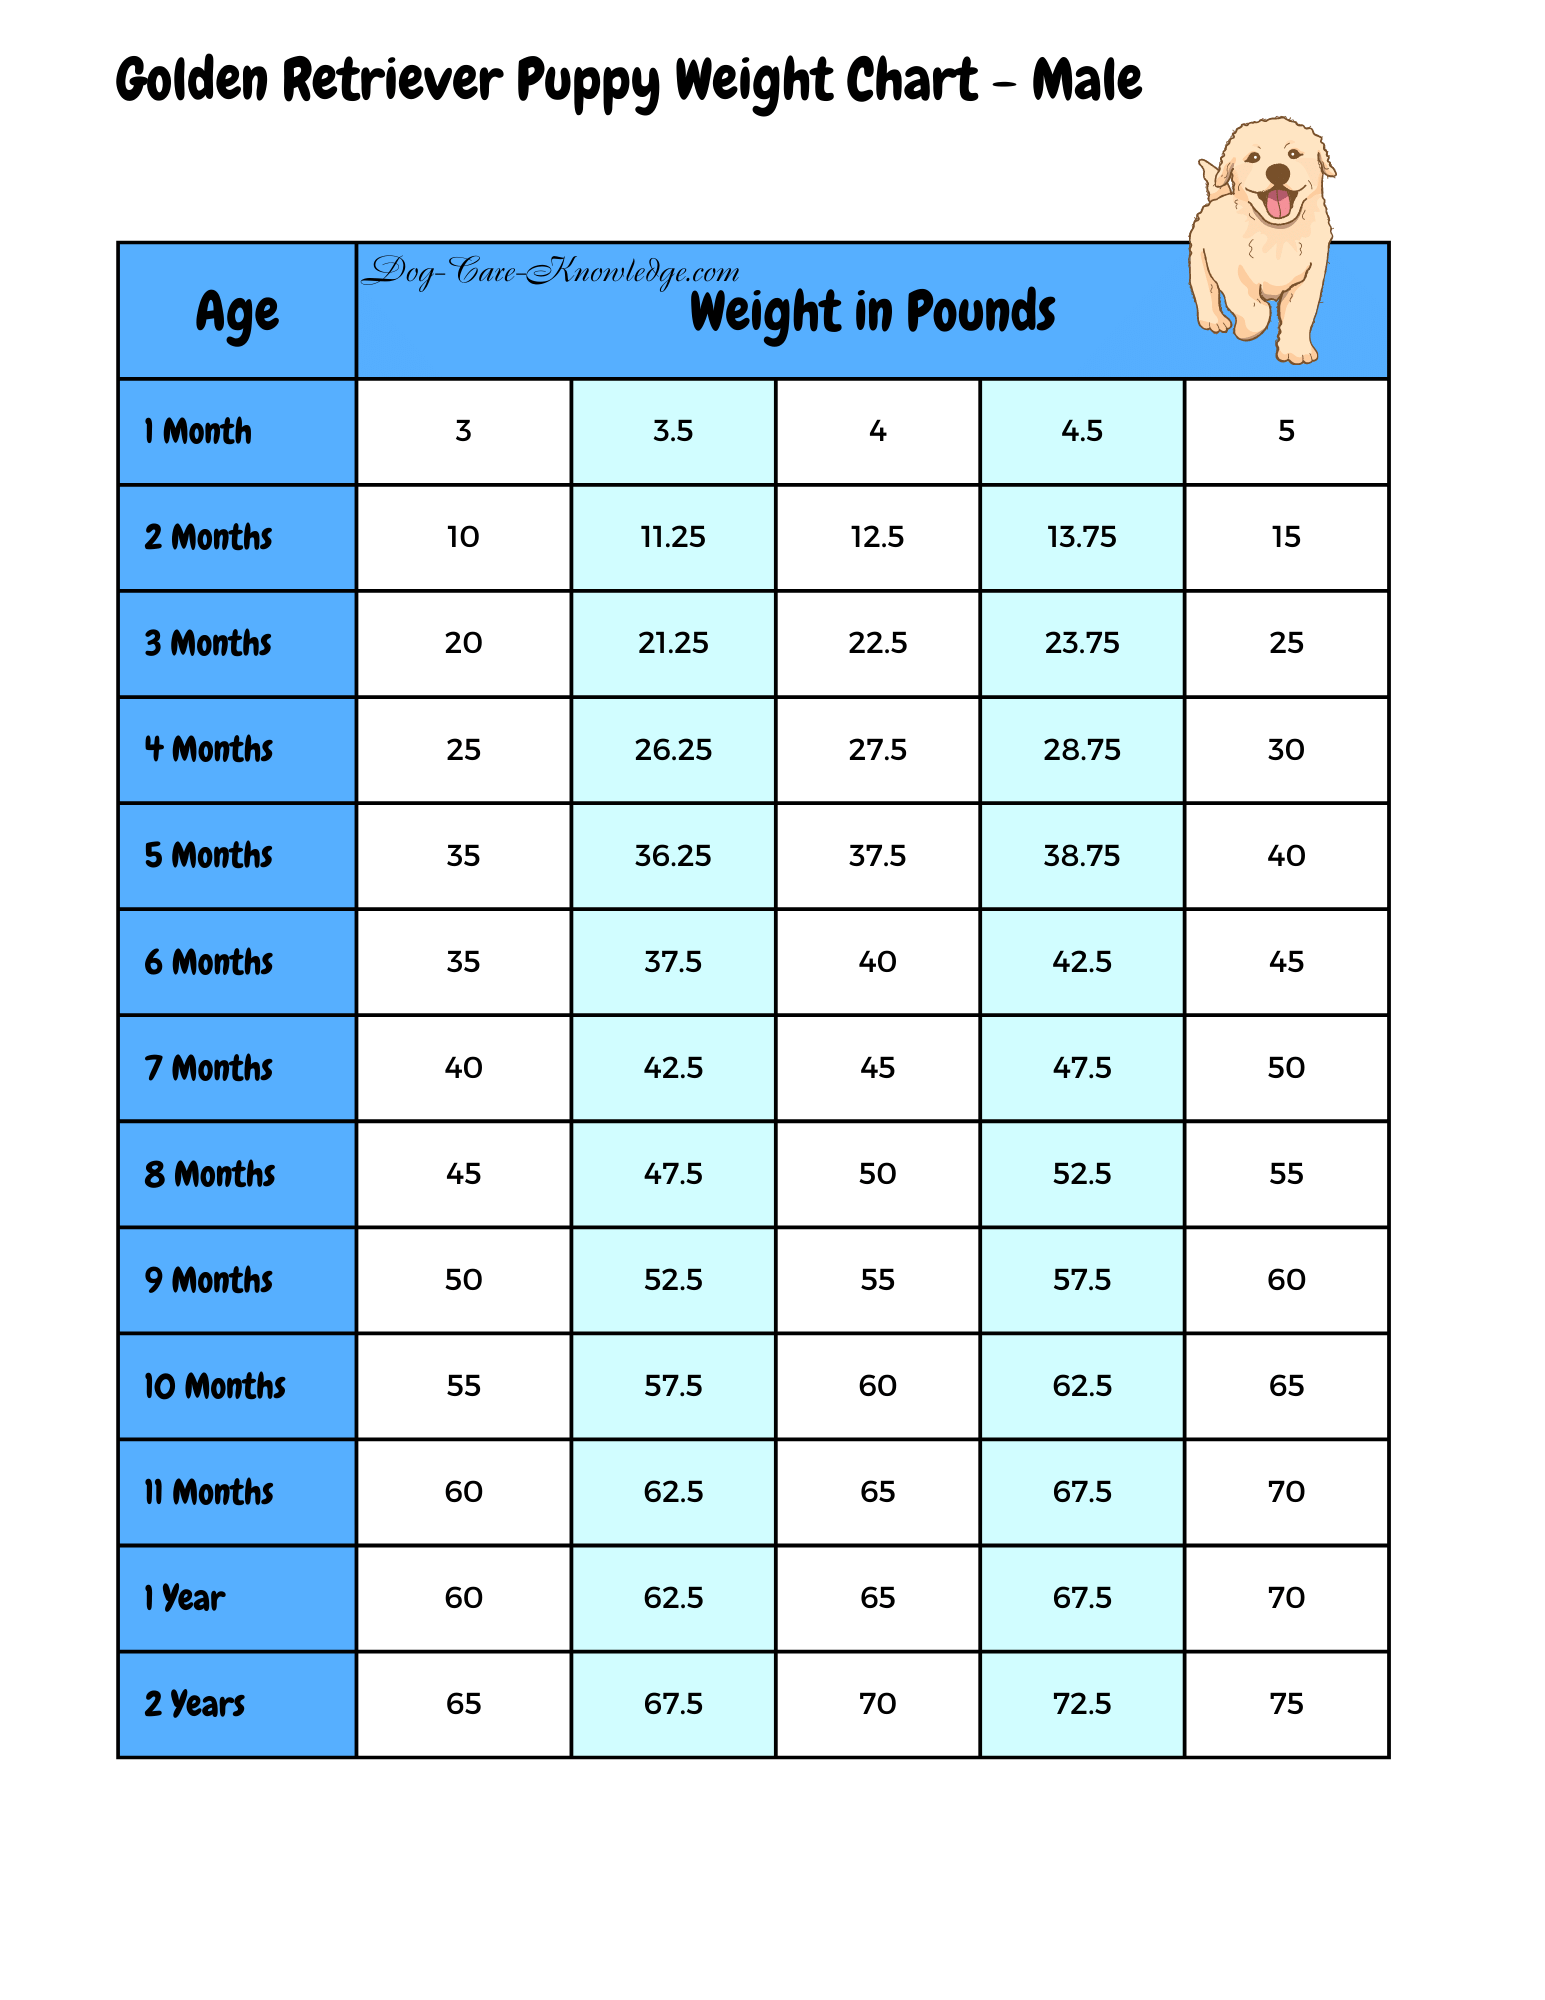 https://www.dog-care-knowledge.com/images/img-golden-retriever-puppy-weight-chart-male.png